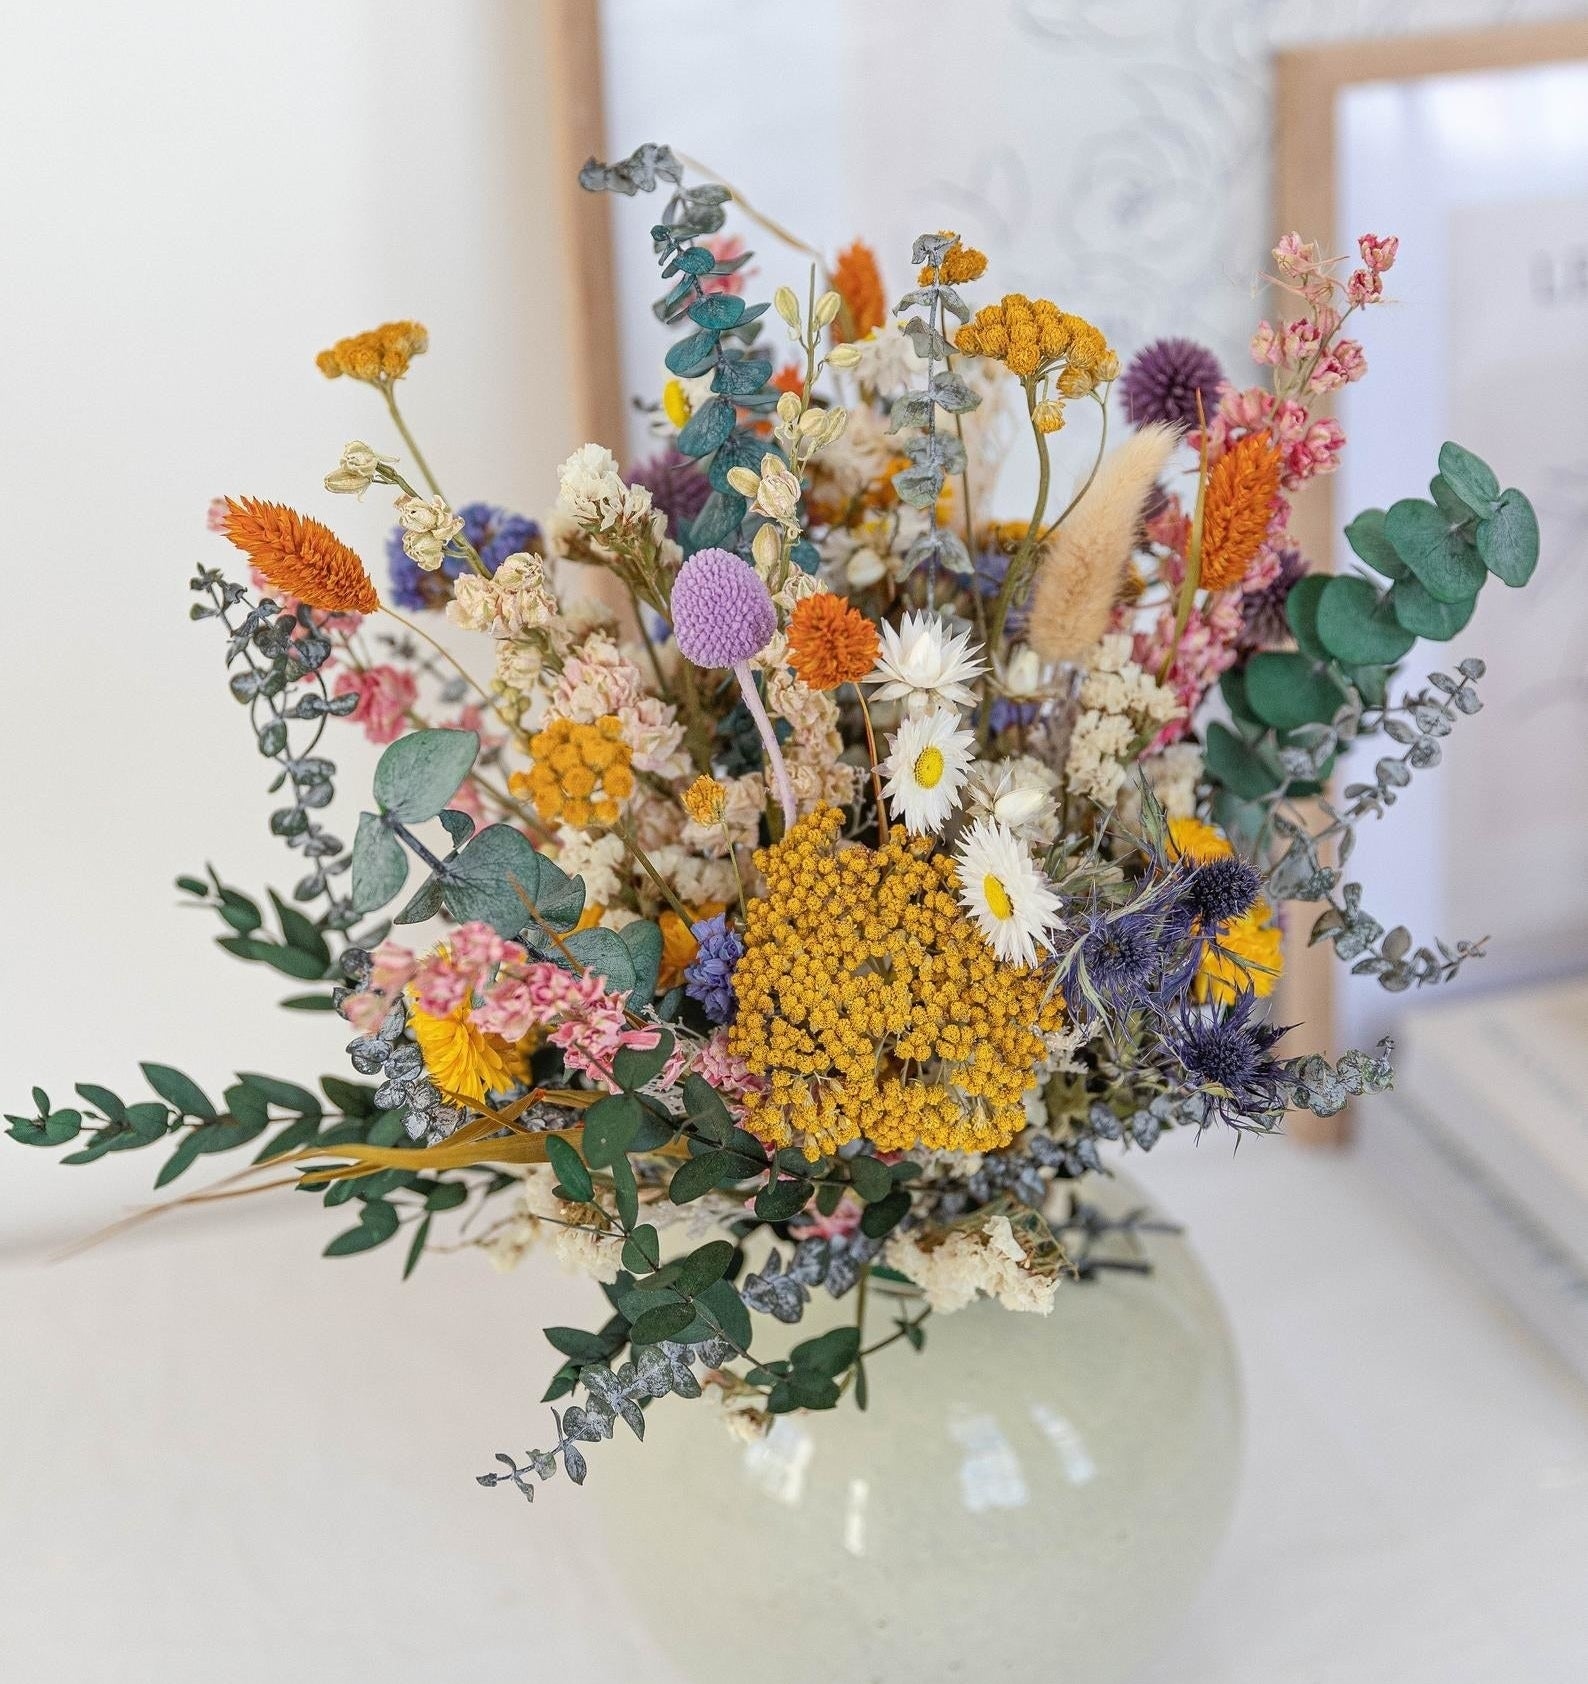 the bouquet in a vase